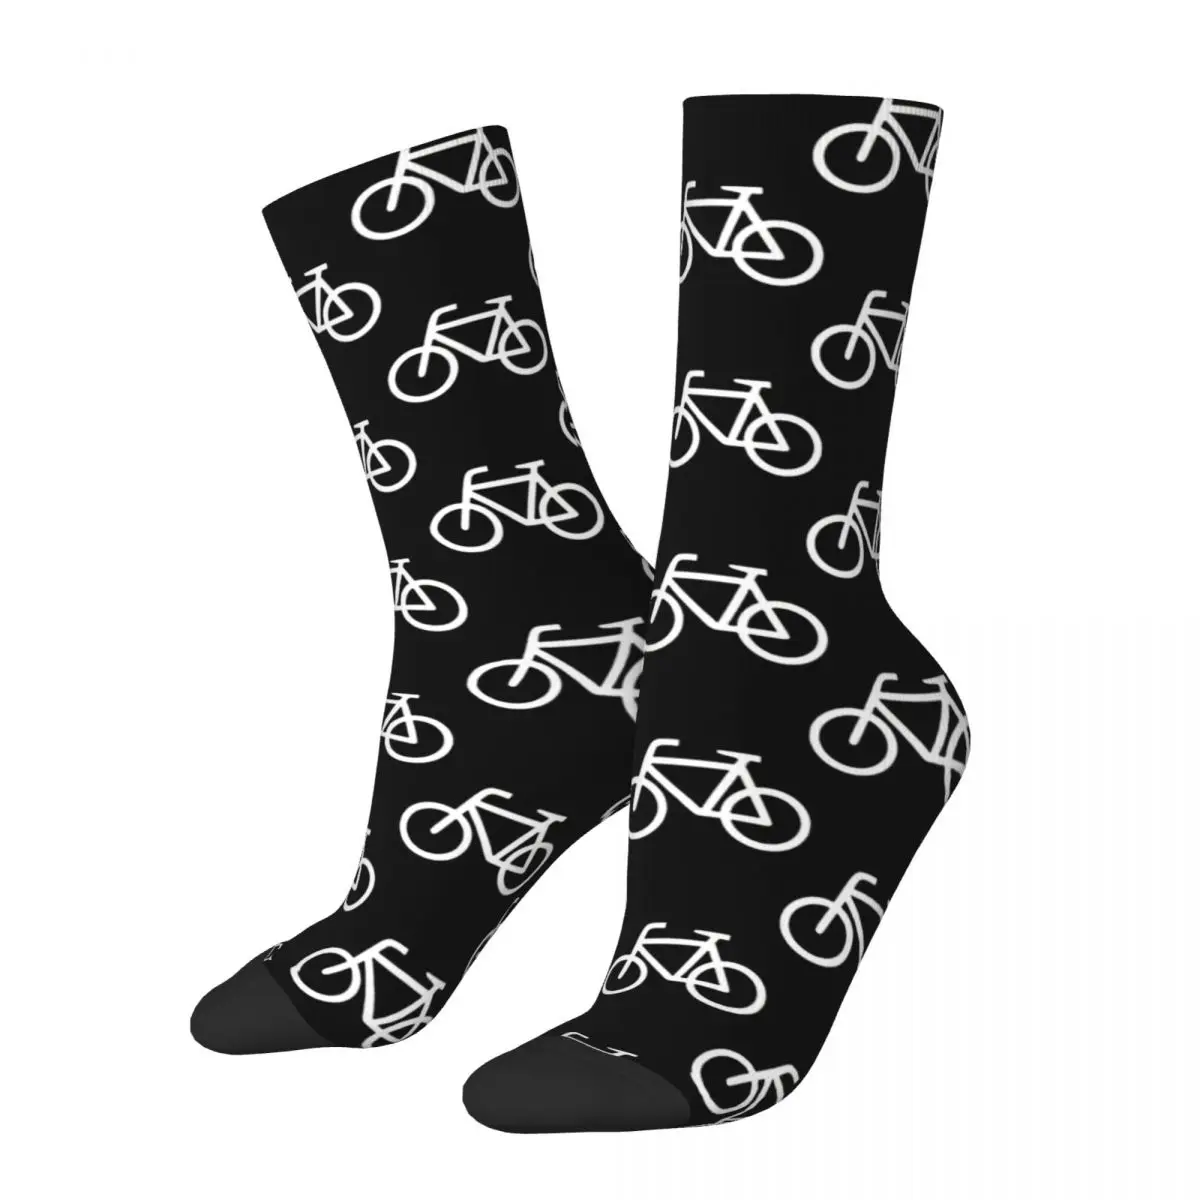 

Funny Crazy Sock for Men White Mountains Downhill Bike Bicycle MTB Happy Quality Pattern Printed Boys Crew Sock Novelty Gift